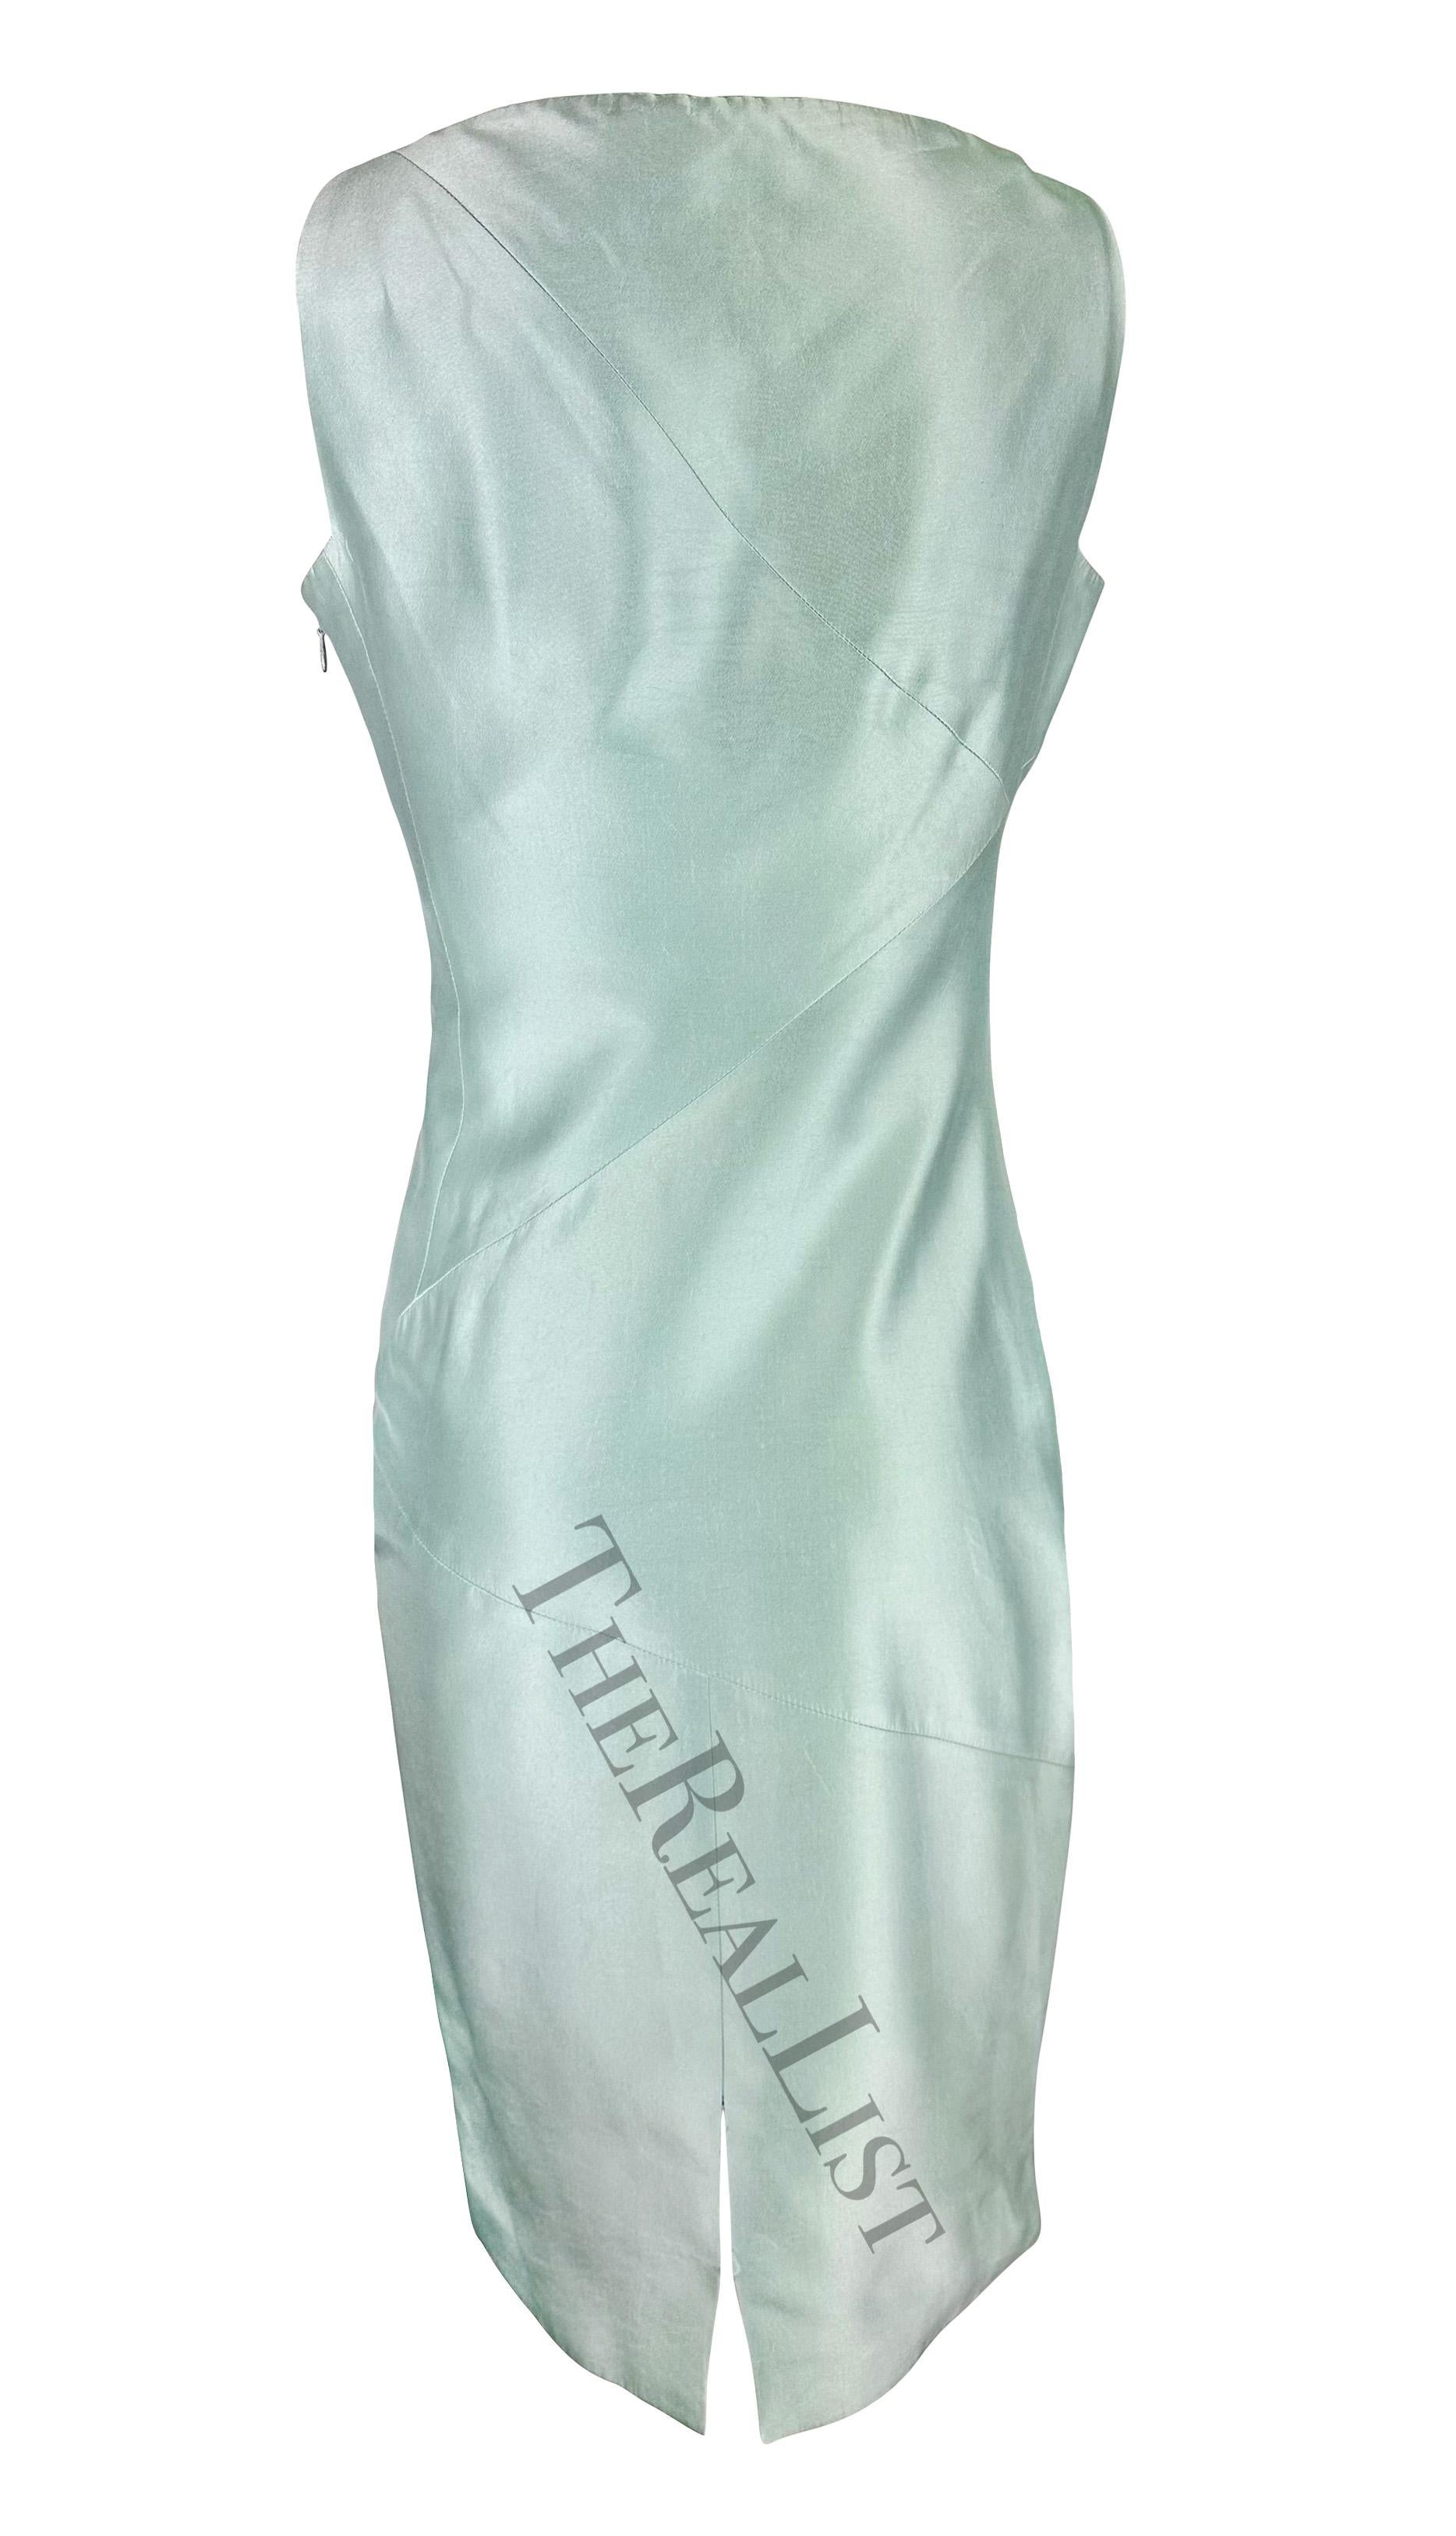 S/S 1998 Gucci by Tom Ford Runway Ad Light Blue Silk Pencil Dress For Sale 3